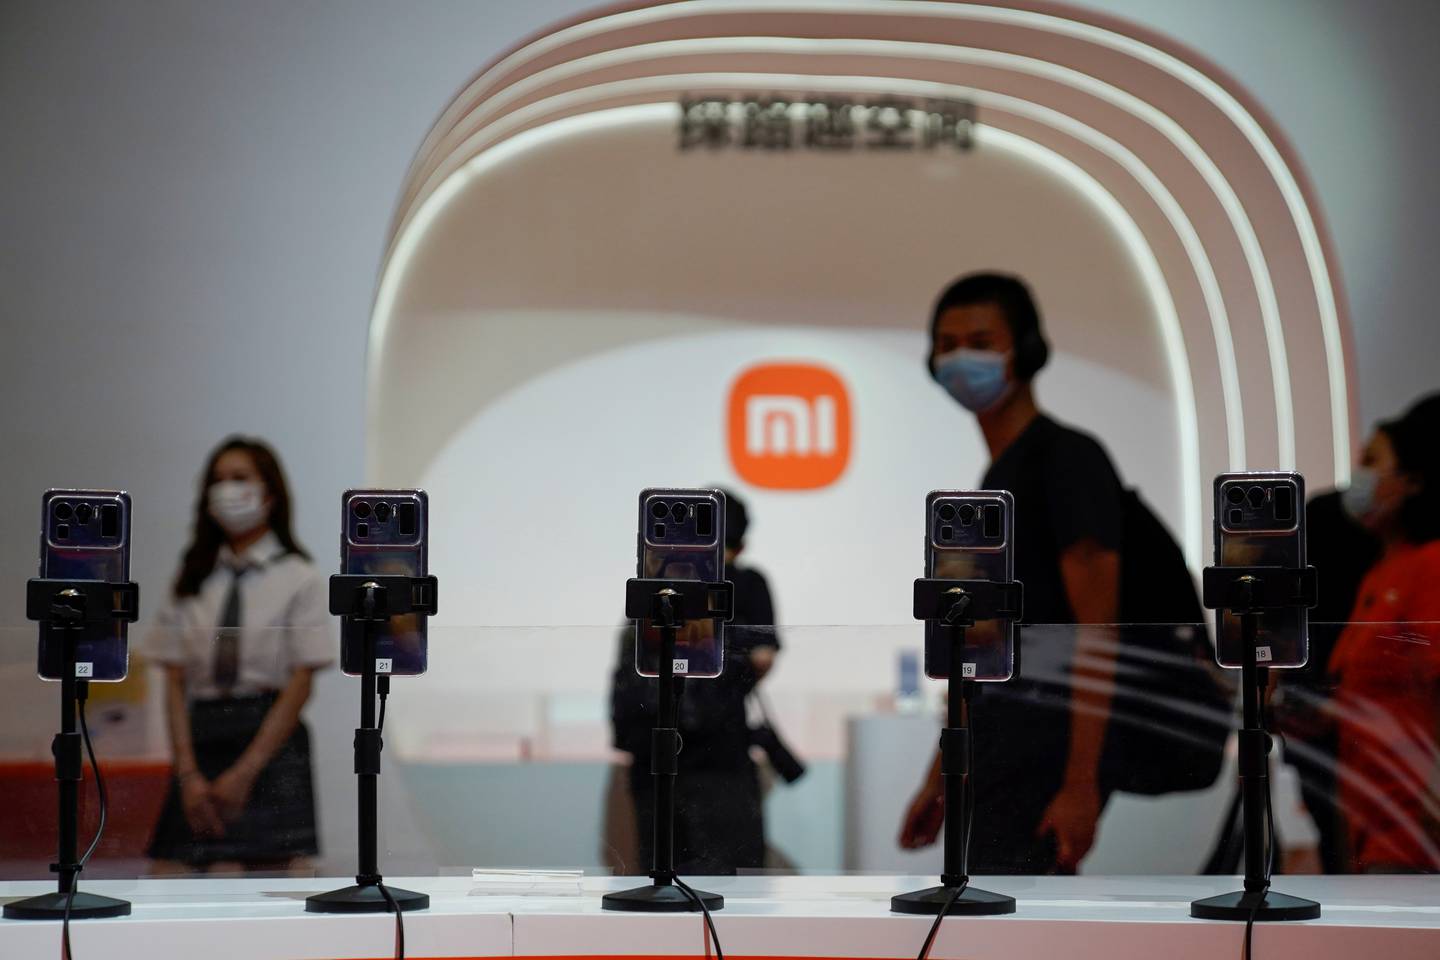 Chinese electronics manufacturer Xiaomi sold more than 44.4 million smartphones in three months to September 30. Reuters